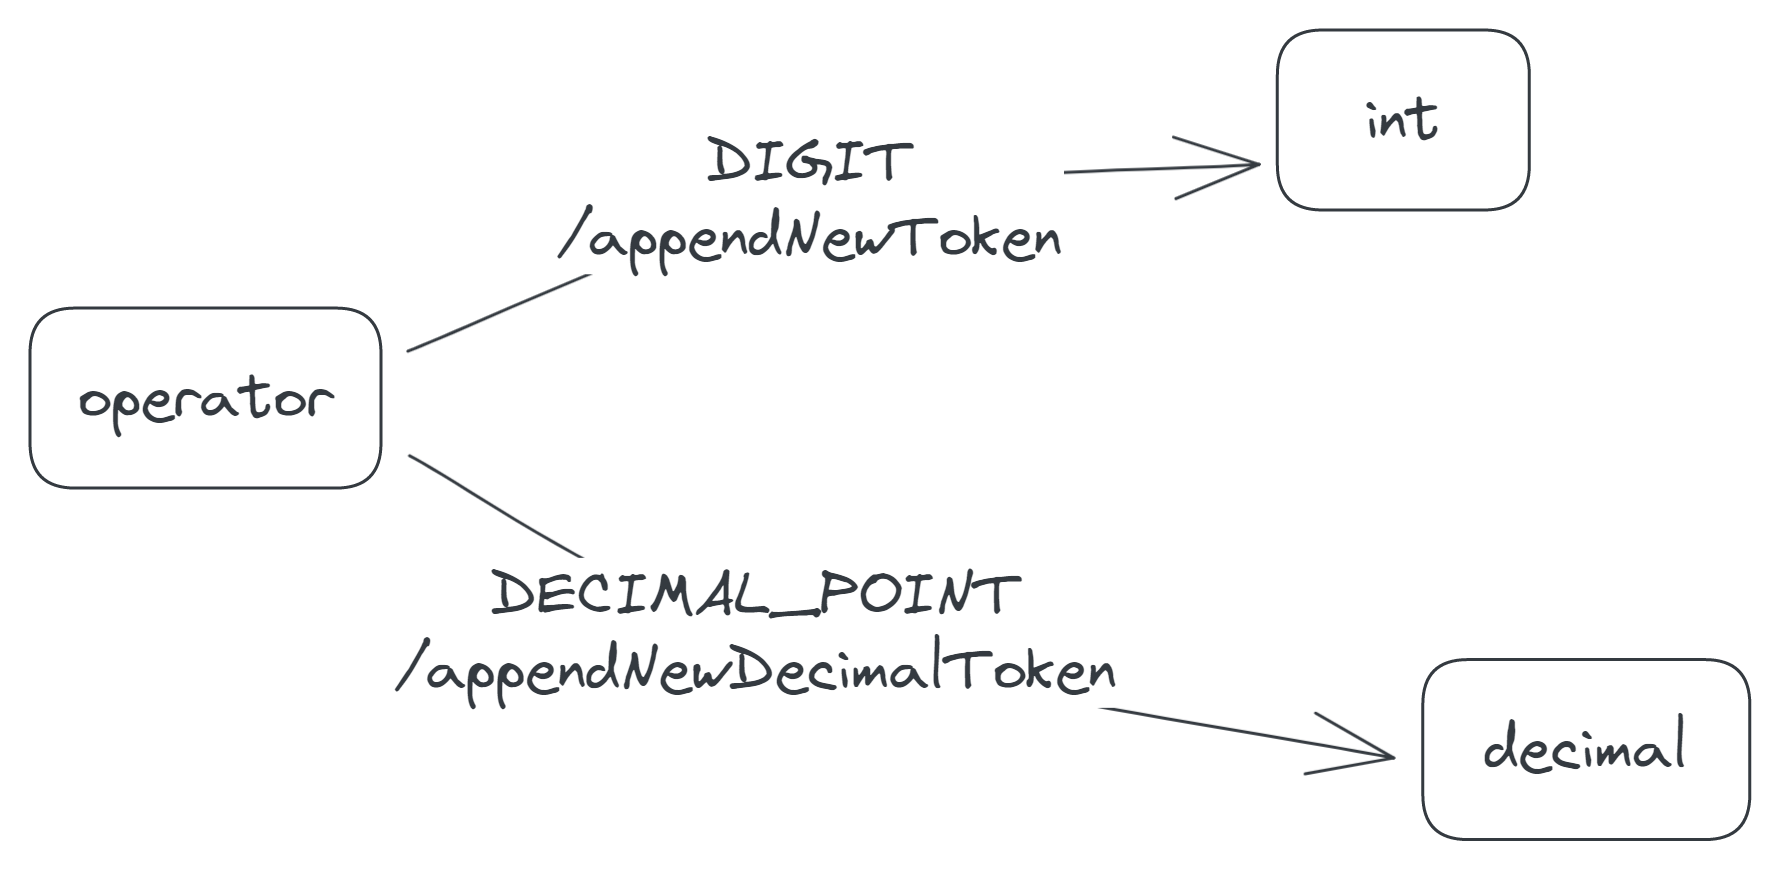 The transitions from the operator state to the int and decimal states. The transitions are labelled 'DIGIT/appendNewToken' and 'DECIMAL_POINT/appendNewDecimalToken', respectively.